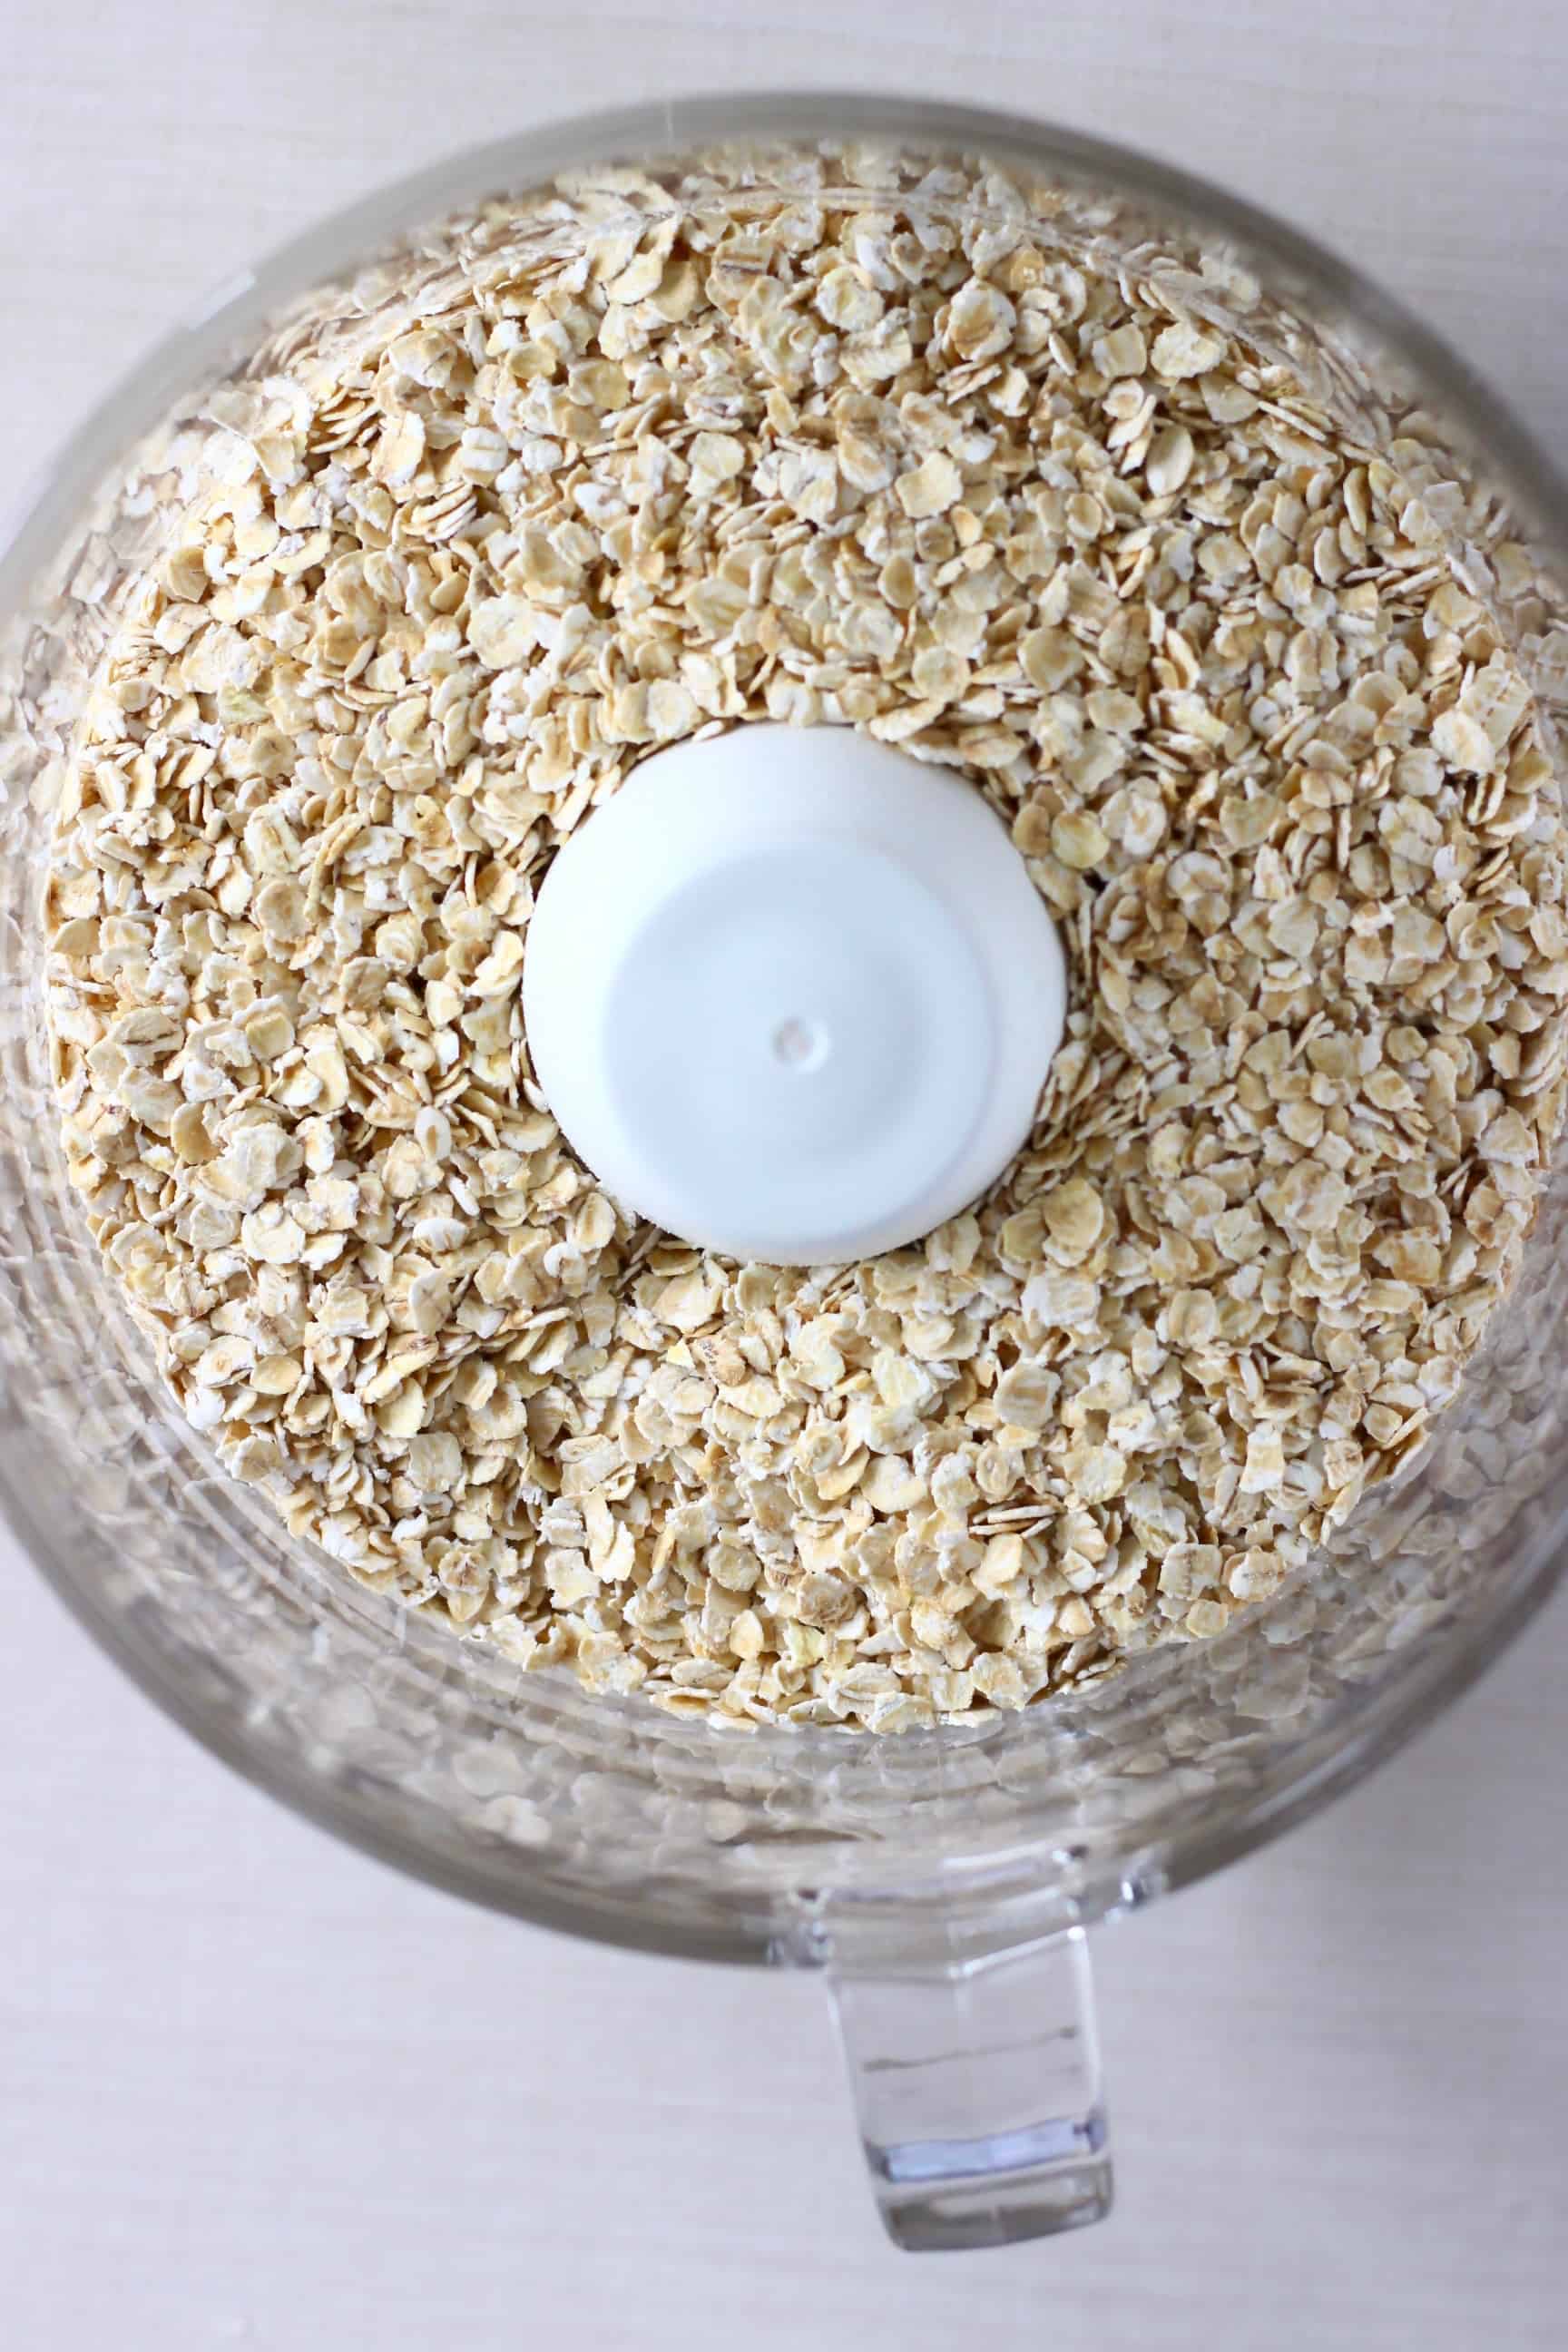 Oats in a food processor against a white background